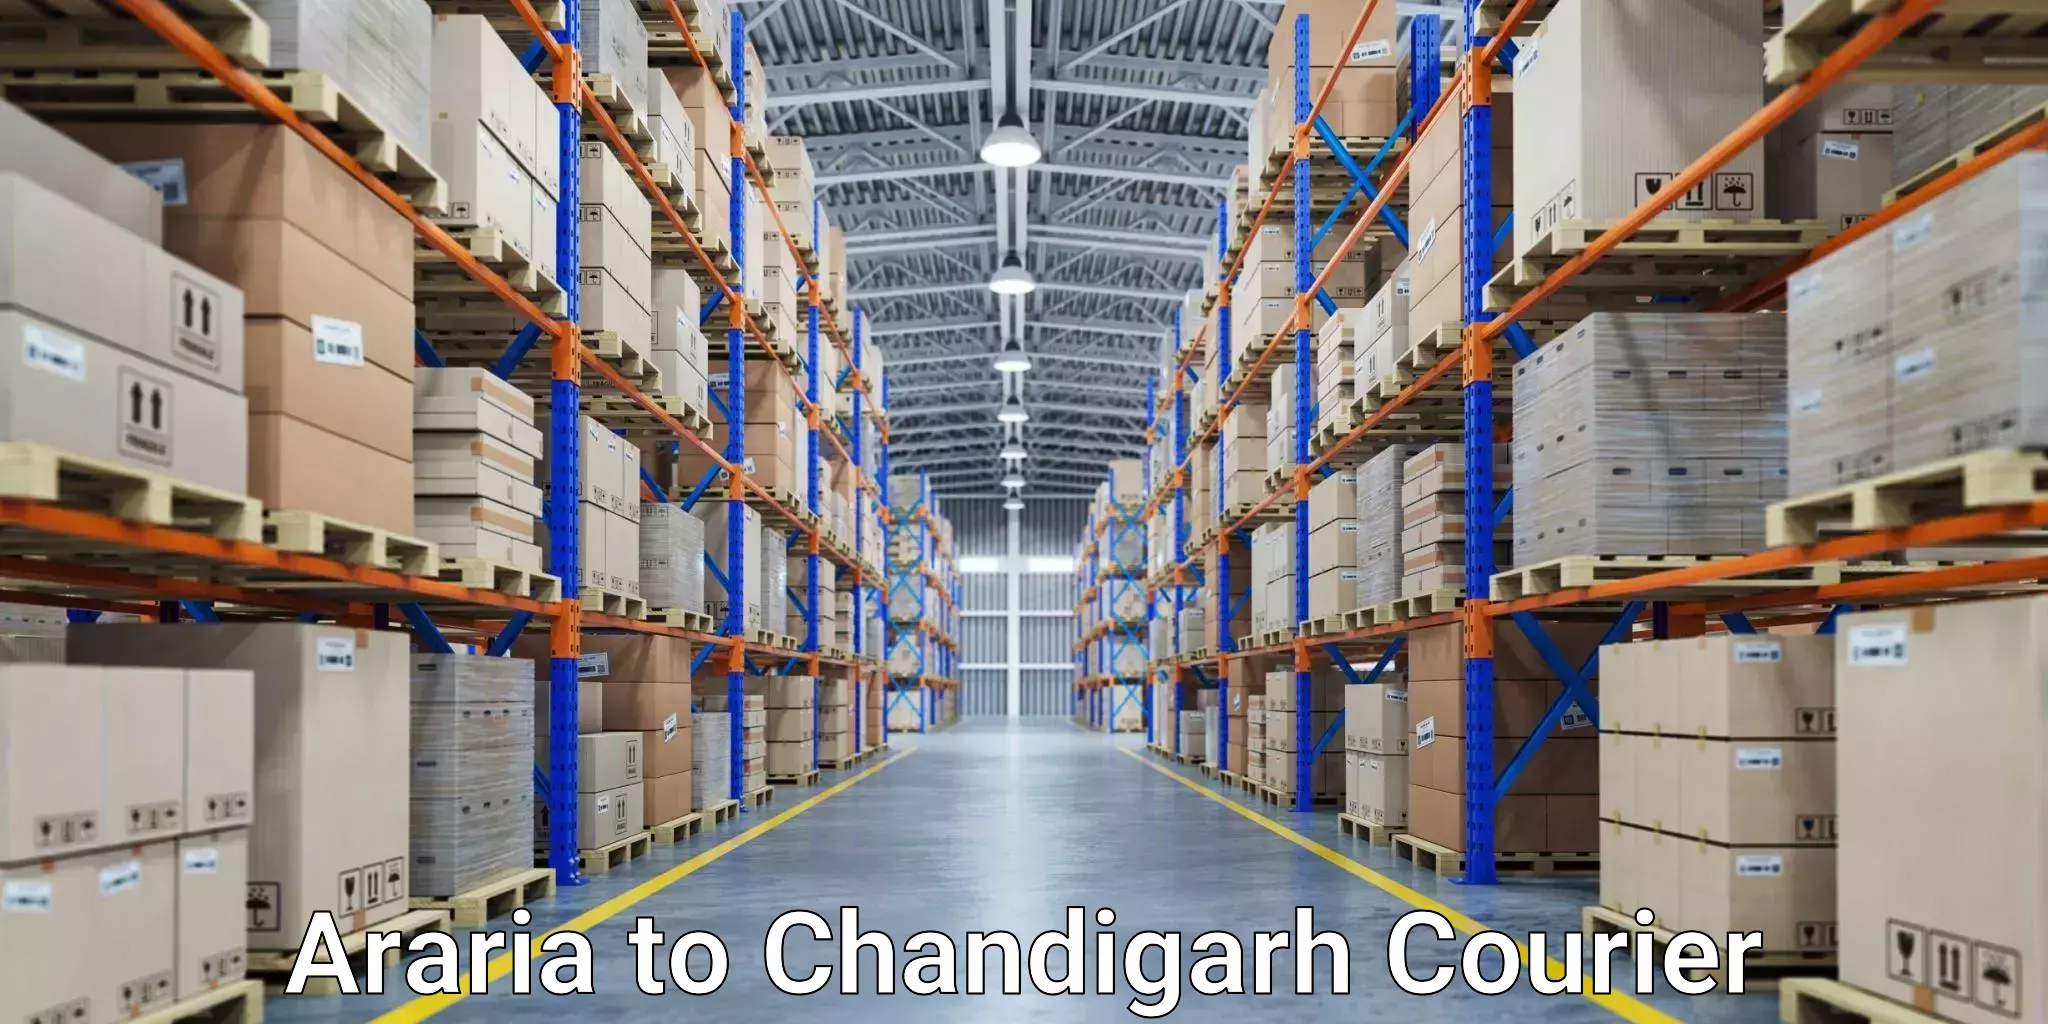 Modern courier technology Araria to Chandigarh